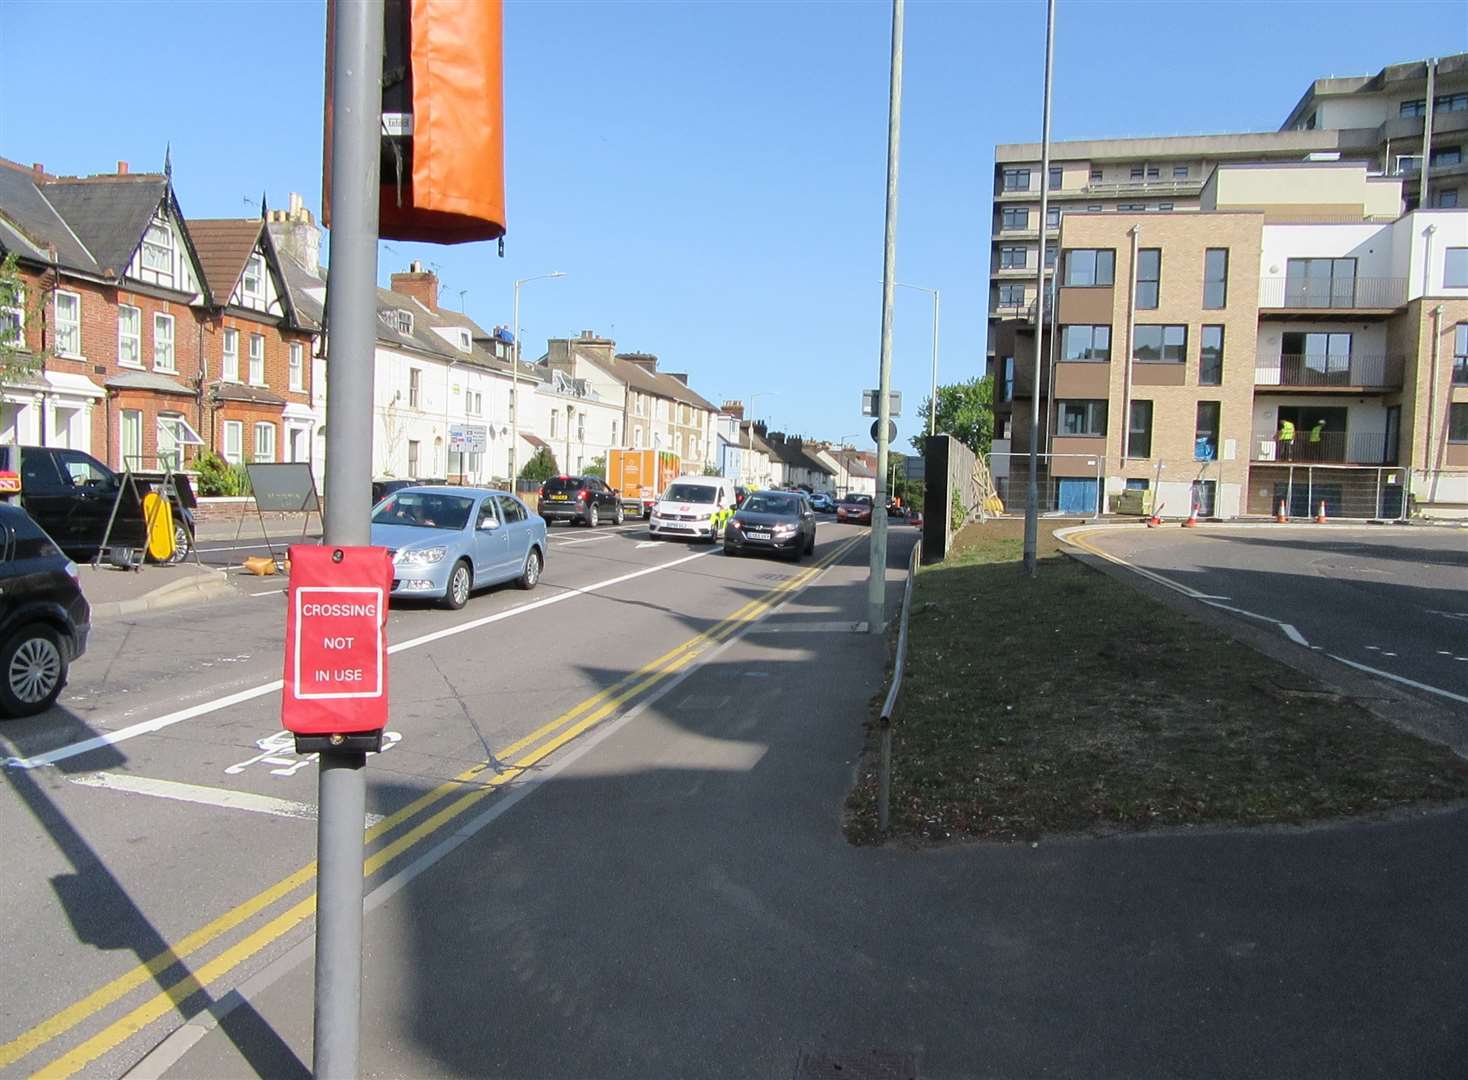 Kennington cyclist Ted Prangnell photographed drivers using the cycle lanes